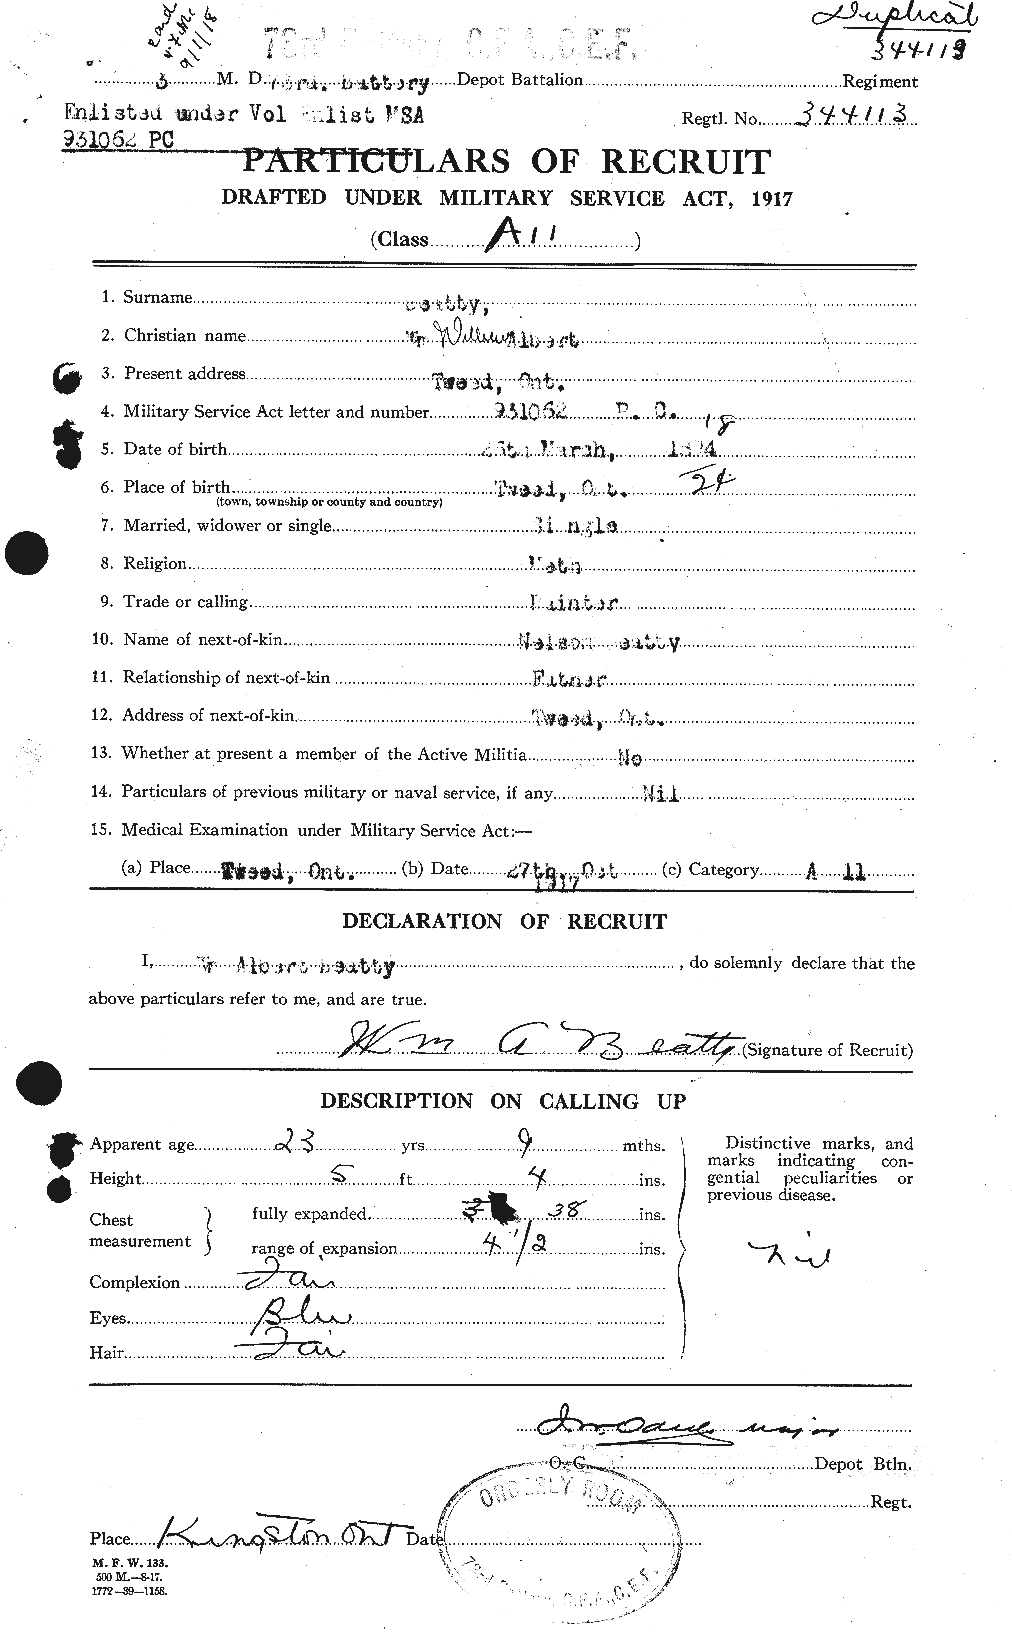 Personnel Records of the First World War - CEF 236456a